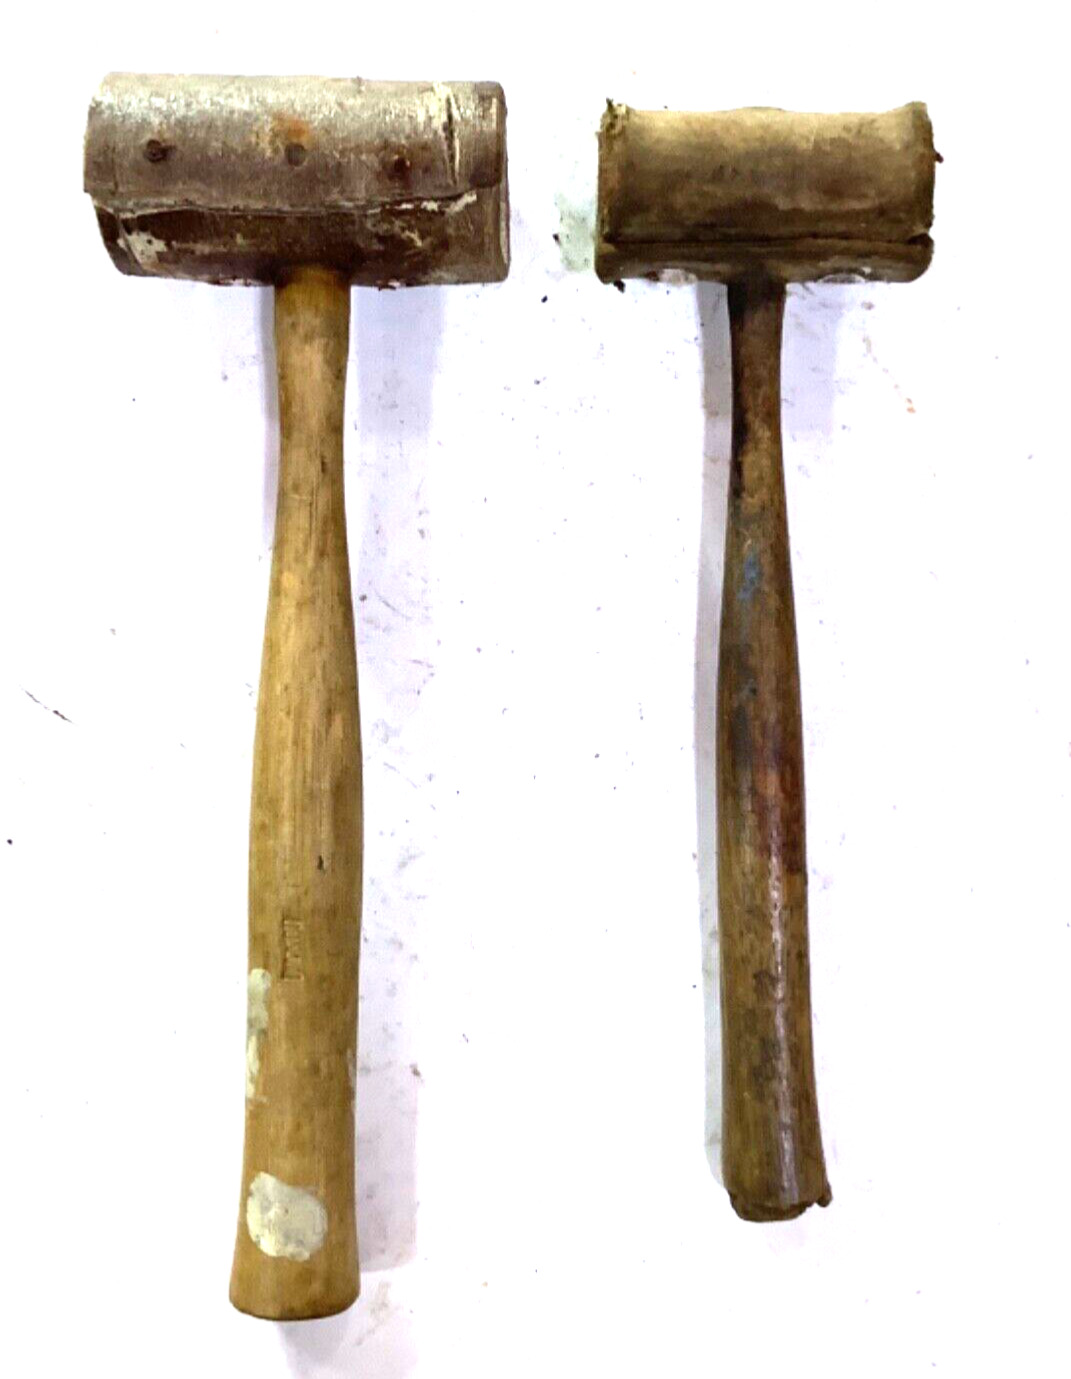 Two old rawhide soft blow mallets